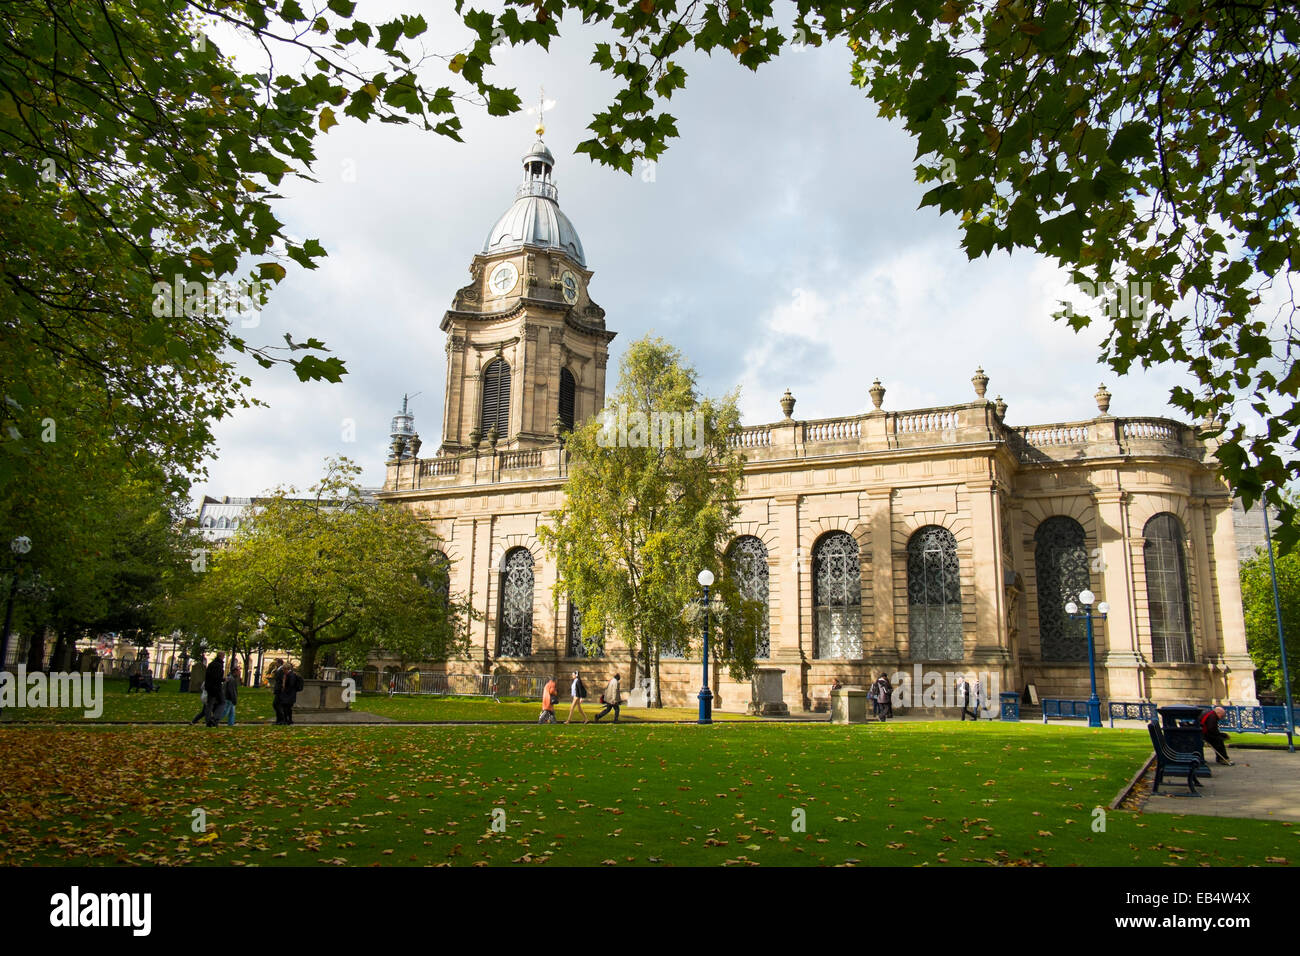 St Philip's cathedral in autumn, Birmingham city centre, West Midlands, England, UK Stock Photo